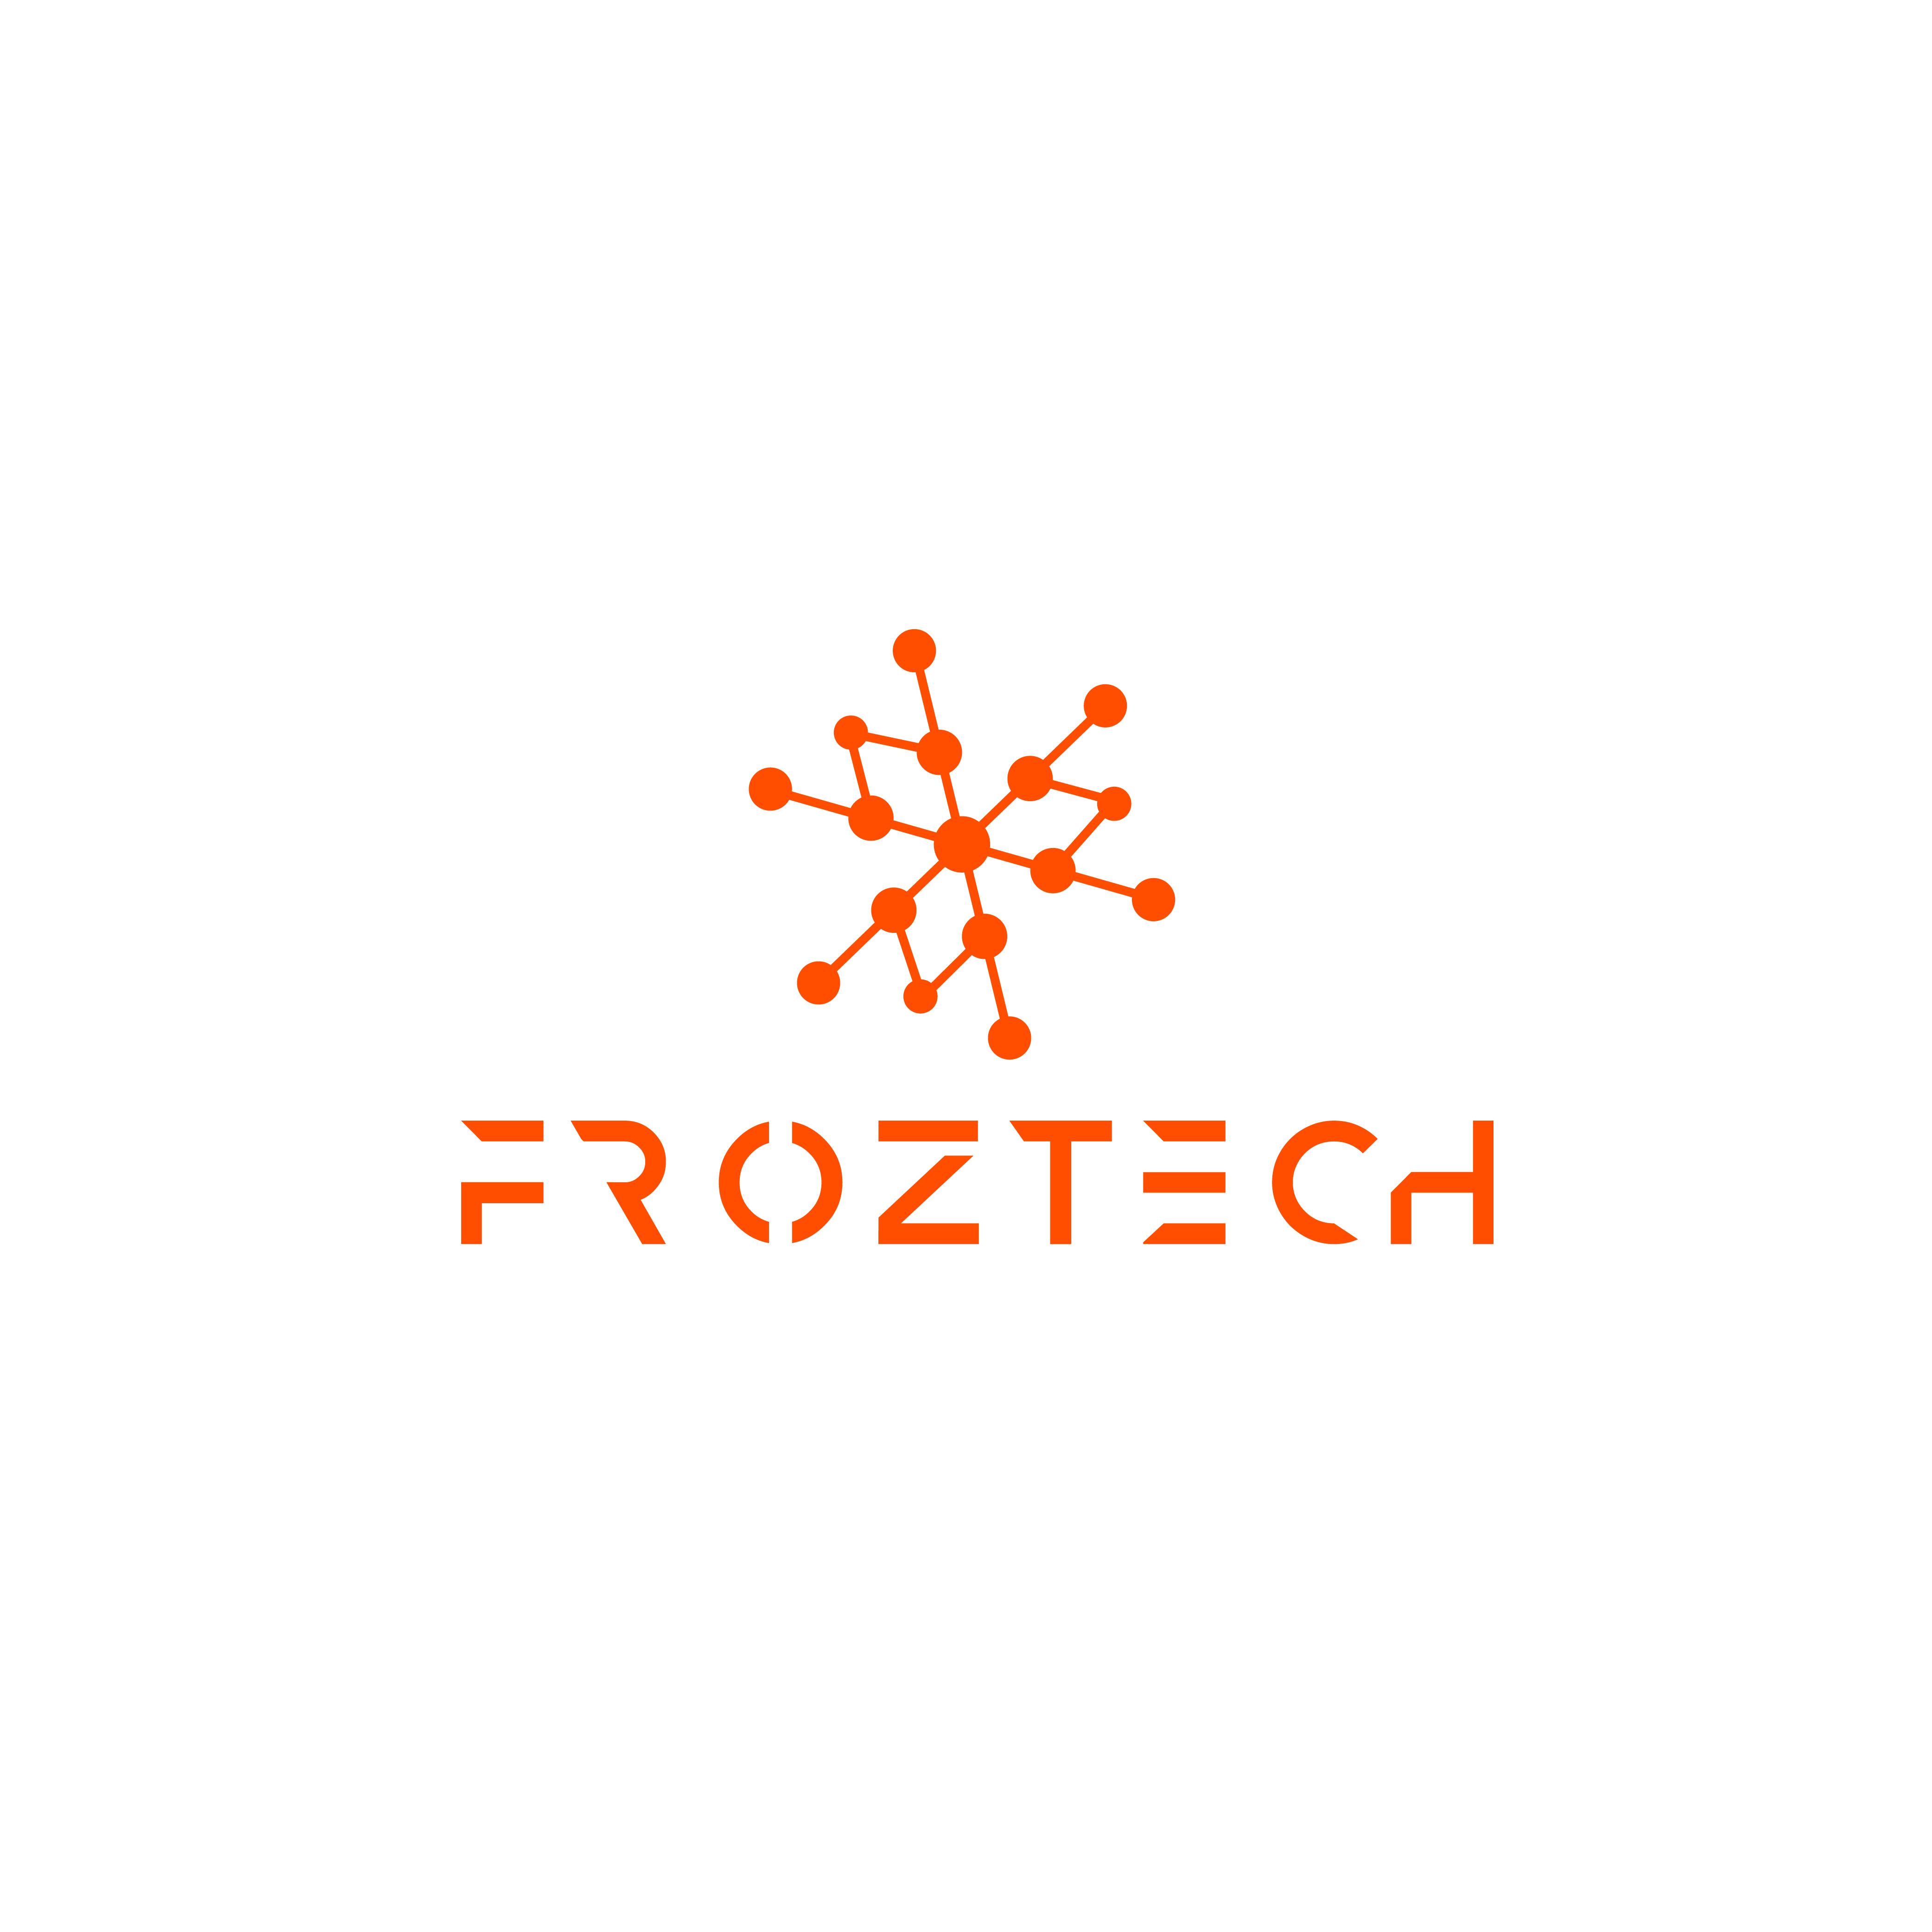 Froztech is helping small businesses and large enterprises alike to improve their digital visibility by providing unparalleled SEO services